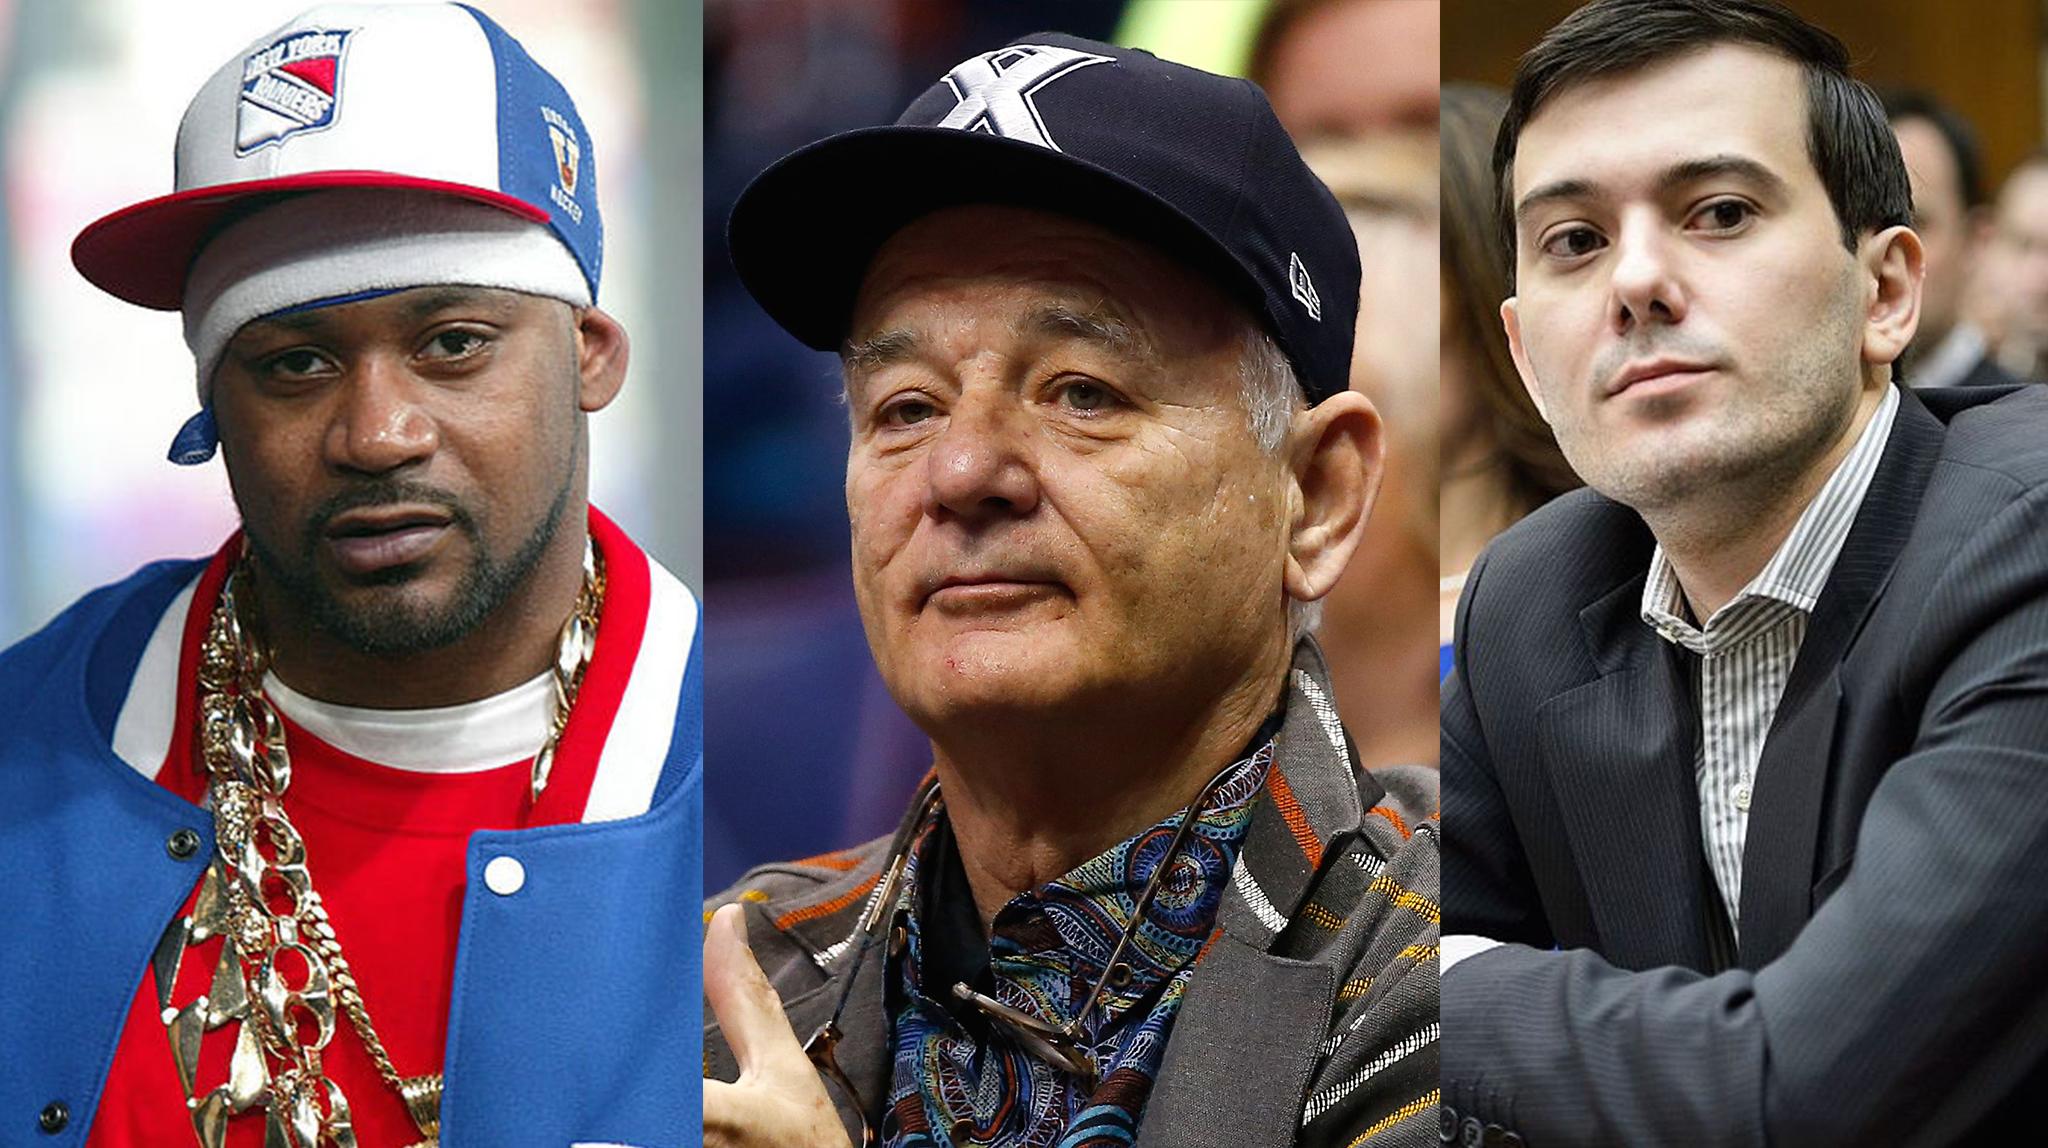 Wu-Tang Clan and Bill Murray steal back $2 million album from Martin  Shkreli in new musical, The Independent